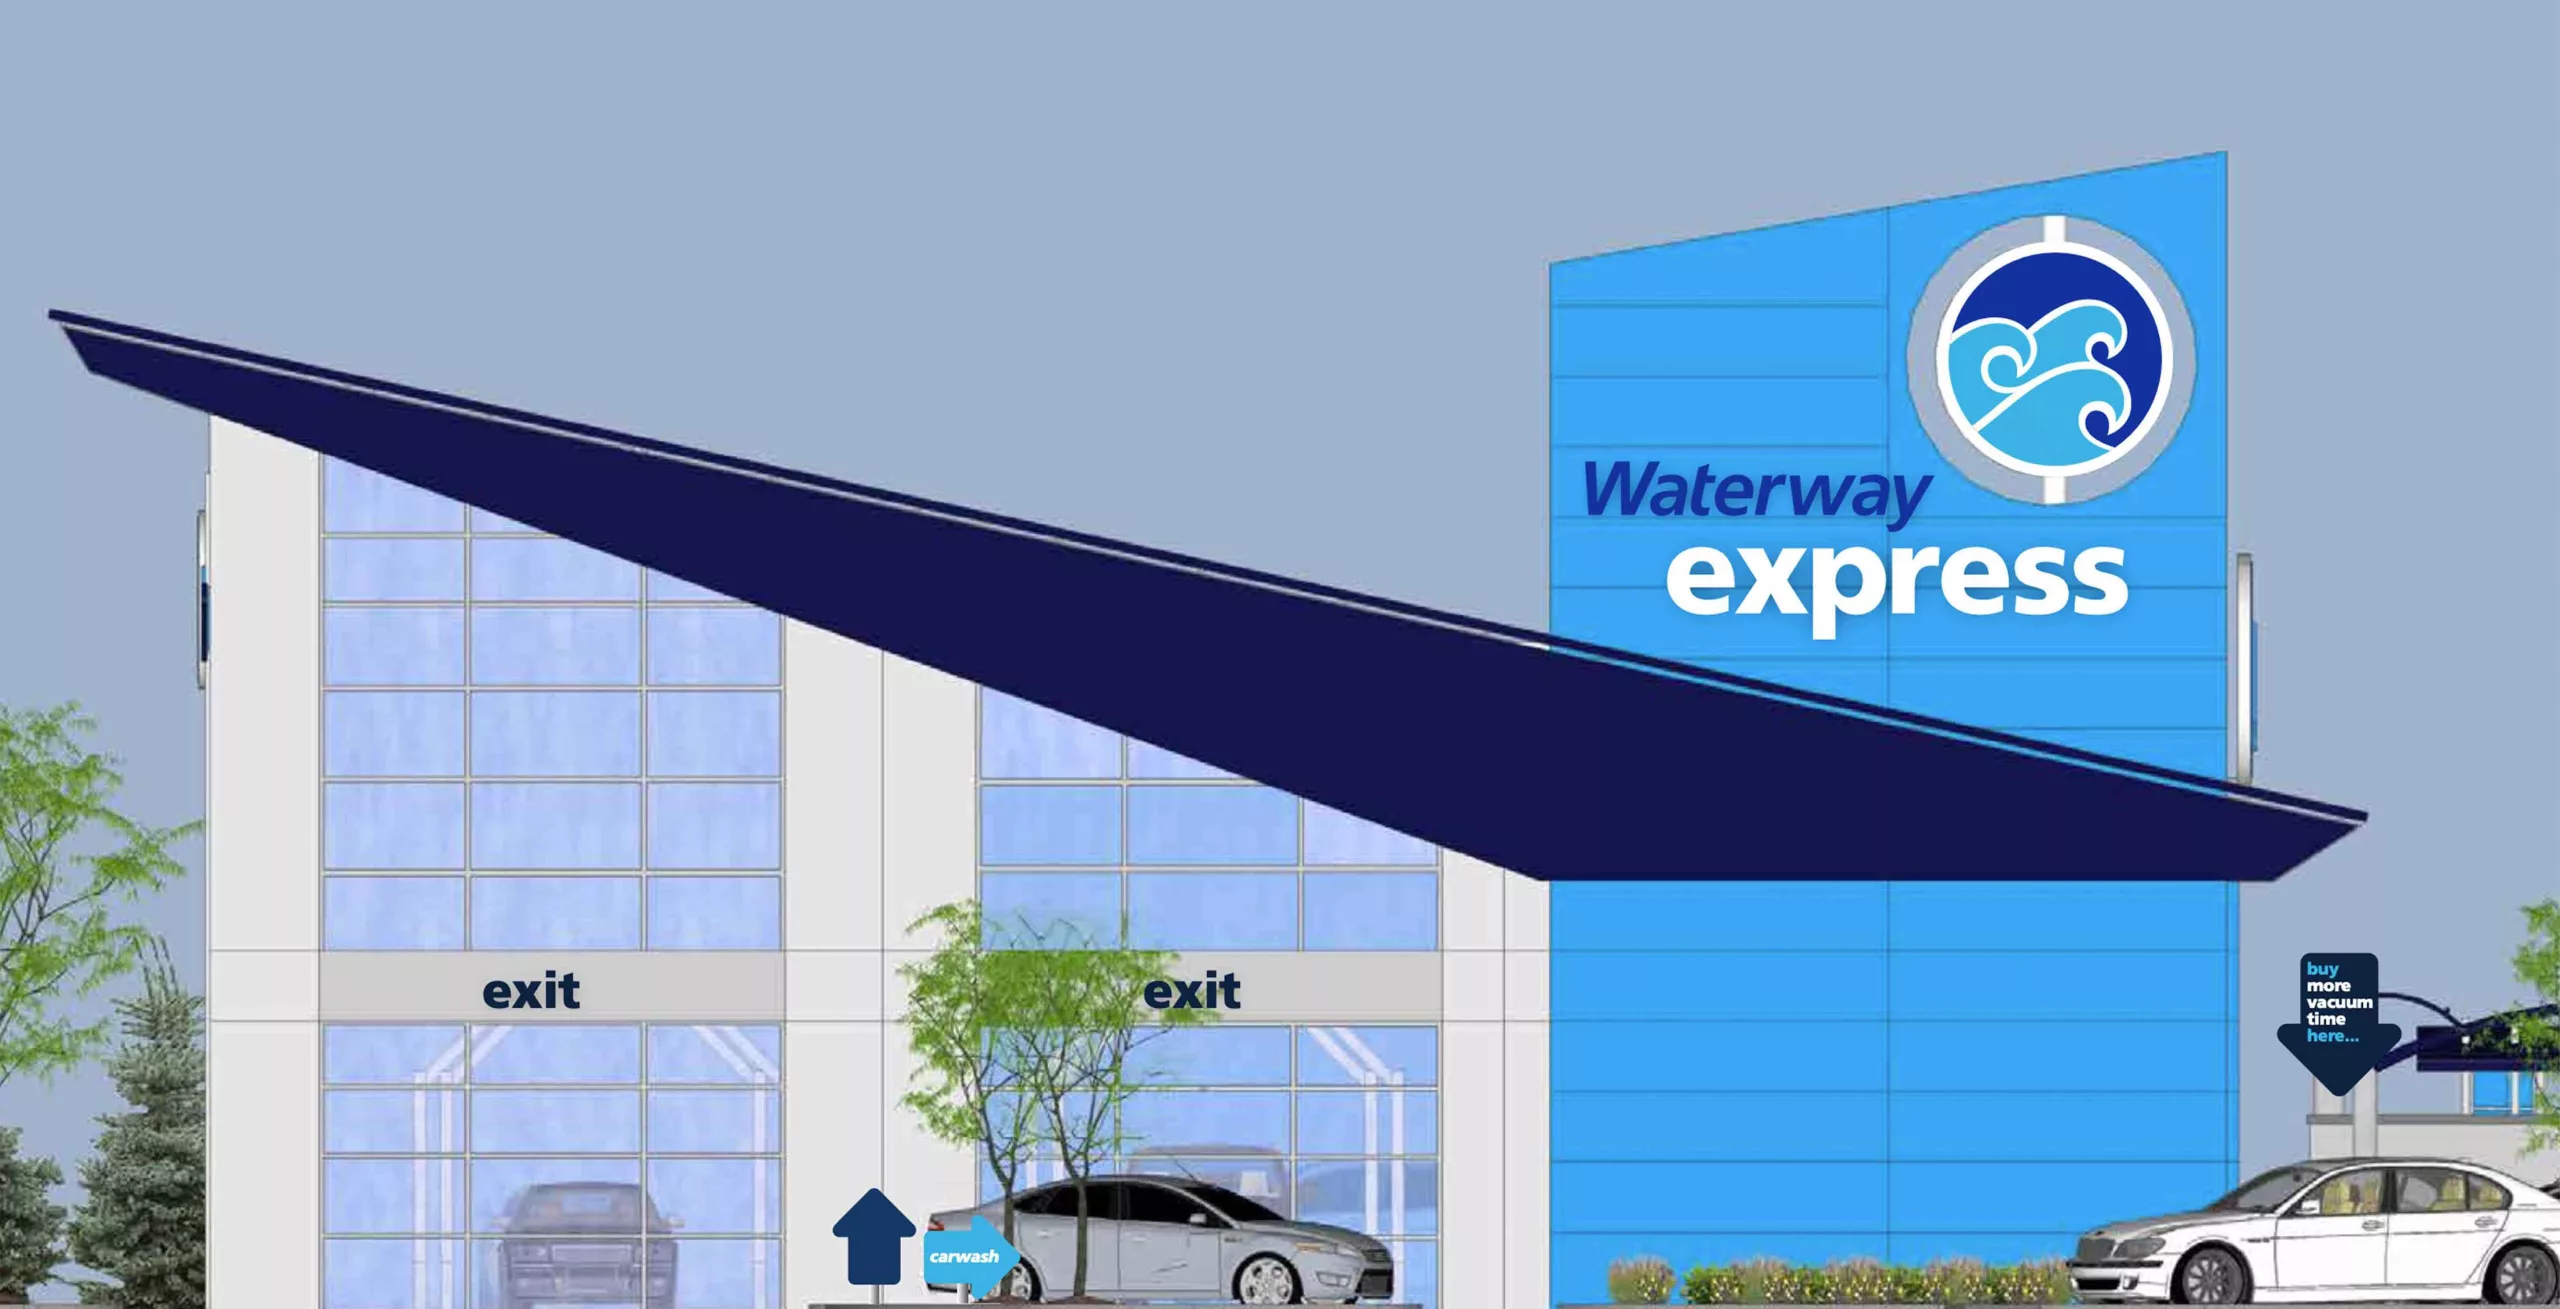 Waterway Carwash signage blueprint for new location